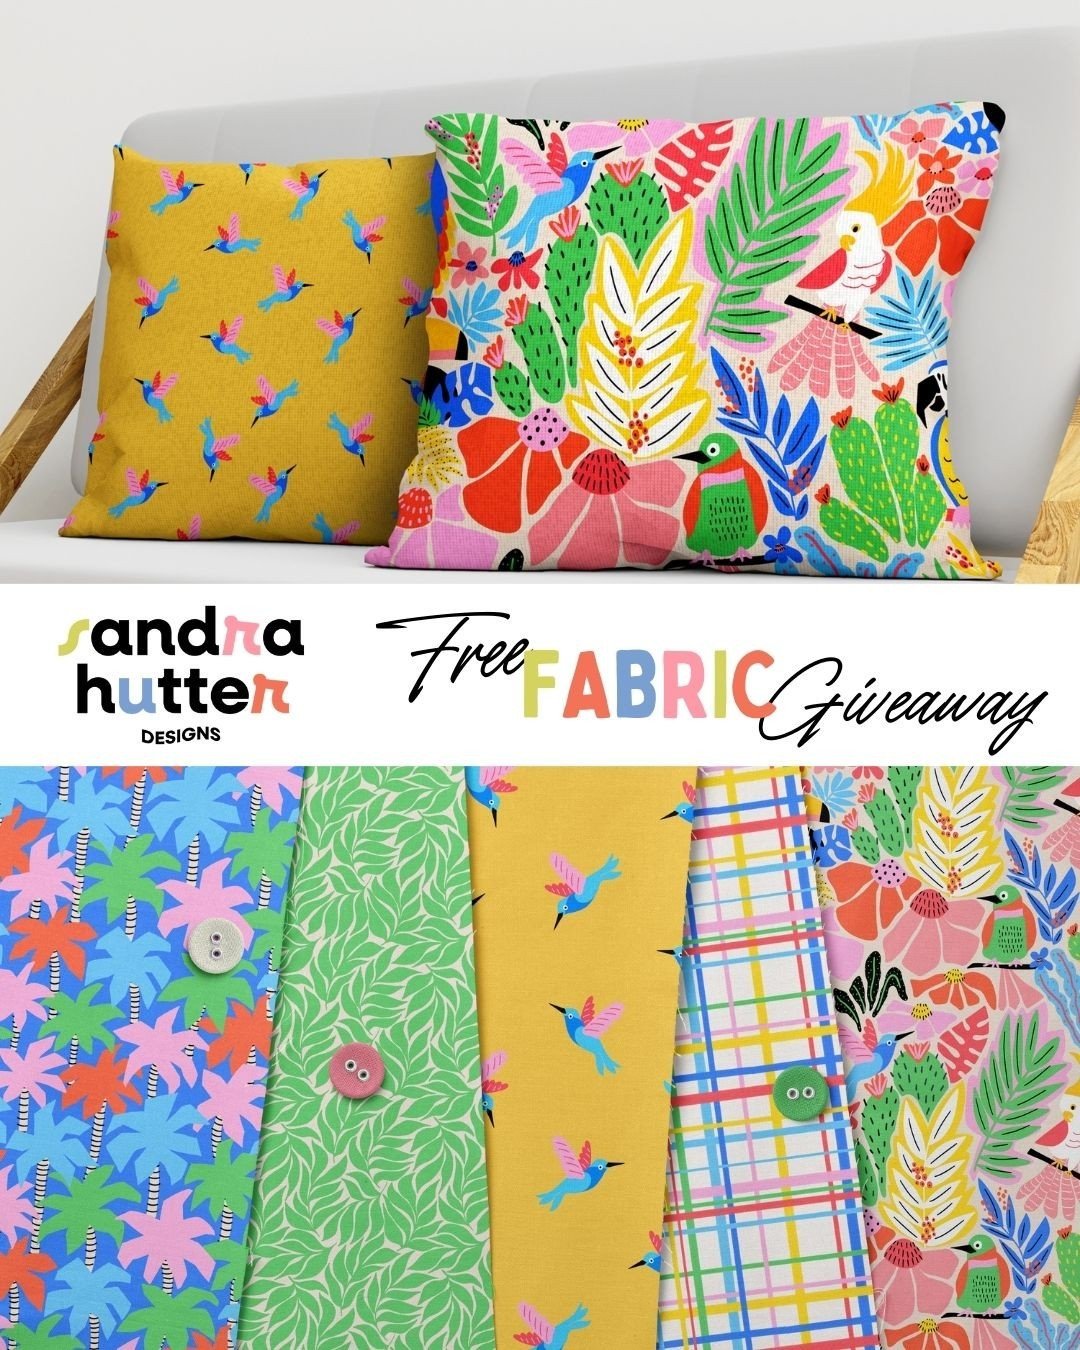 📣GIVEAWAY ALERT📣⁠
⁠
To celebrate the reveal of my JOYFUL JUNGLE collection, I'm hosting a special giveaway running until next Tuesday! You can win 1 yard of Spoonflower fabric of your choice from the collection!⁠
⁠
To enter:⁠
⁠
1️⃣ Drop a comment b